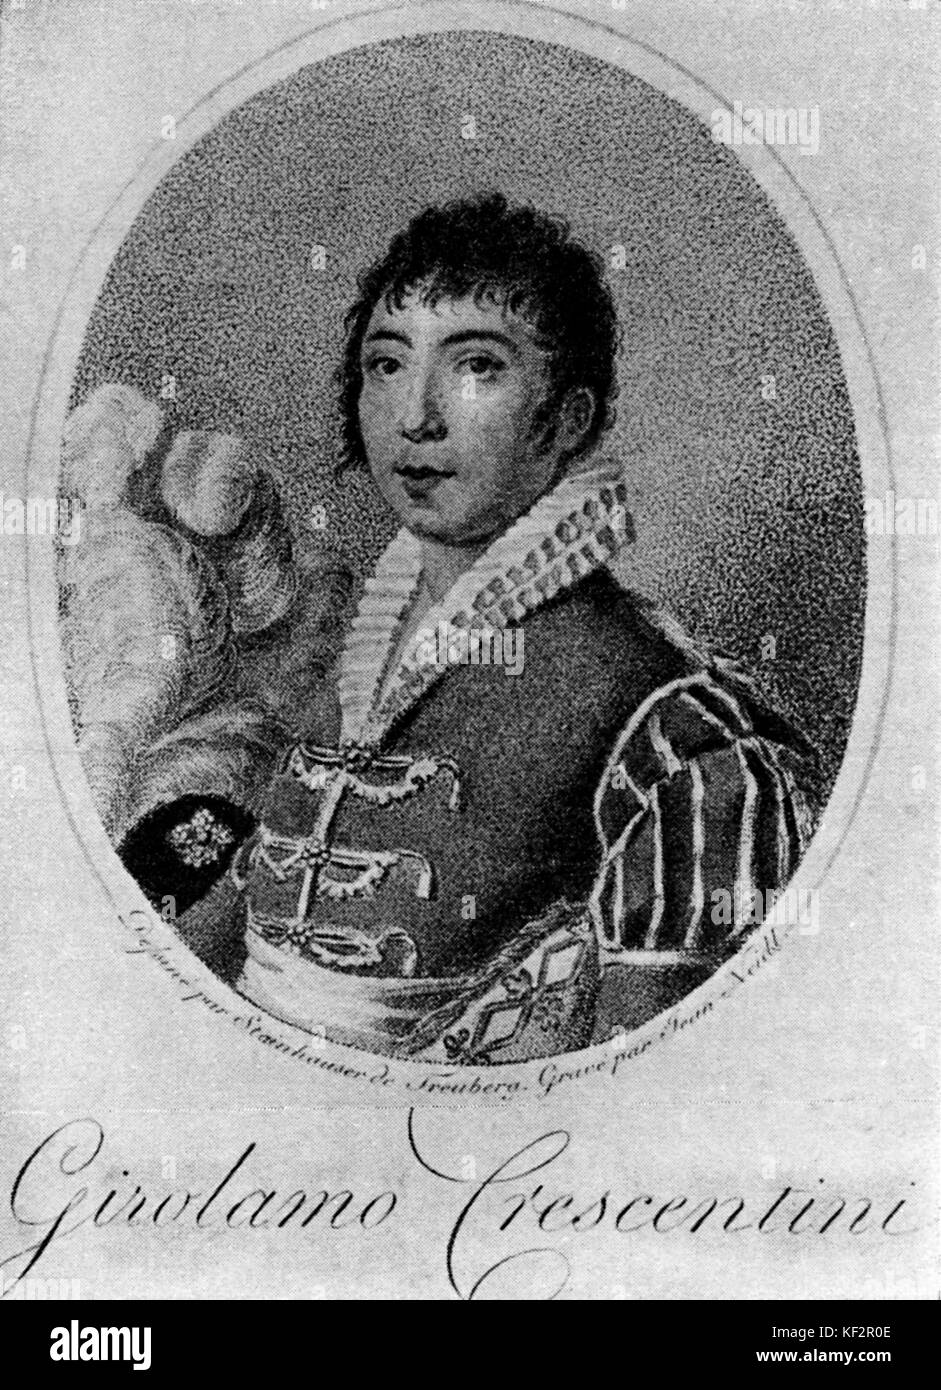 Girolamo Crescentini - Italian singer castrato, singing teacher and composer, 2 February 1762 –  24 April  1846. After an egraving by G Neidl. Stock Photo